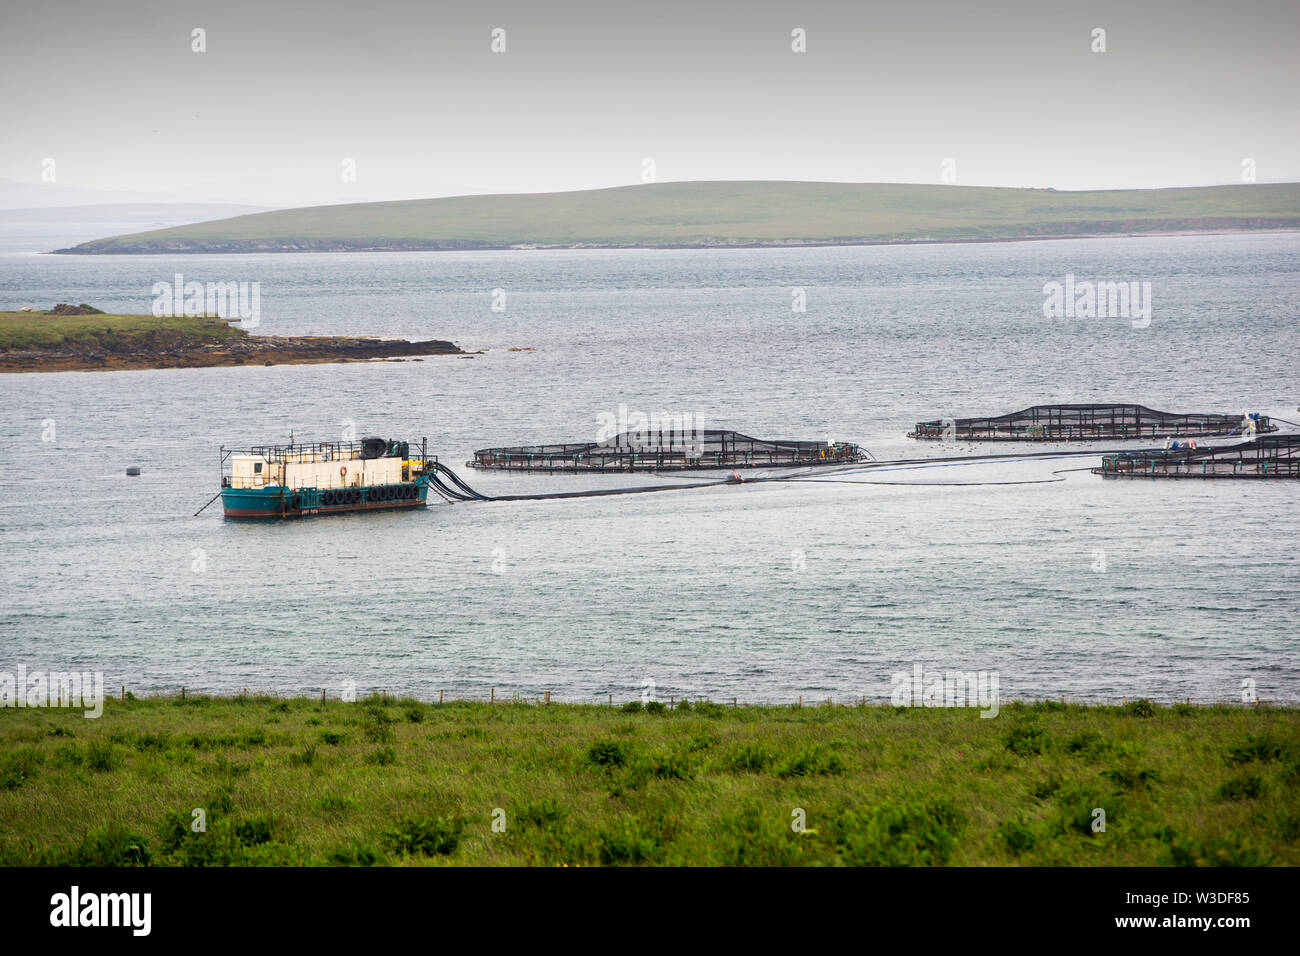 A fish farm in the Bay of Kirkwall, Orkney, Scotland, UK. Stock Photo